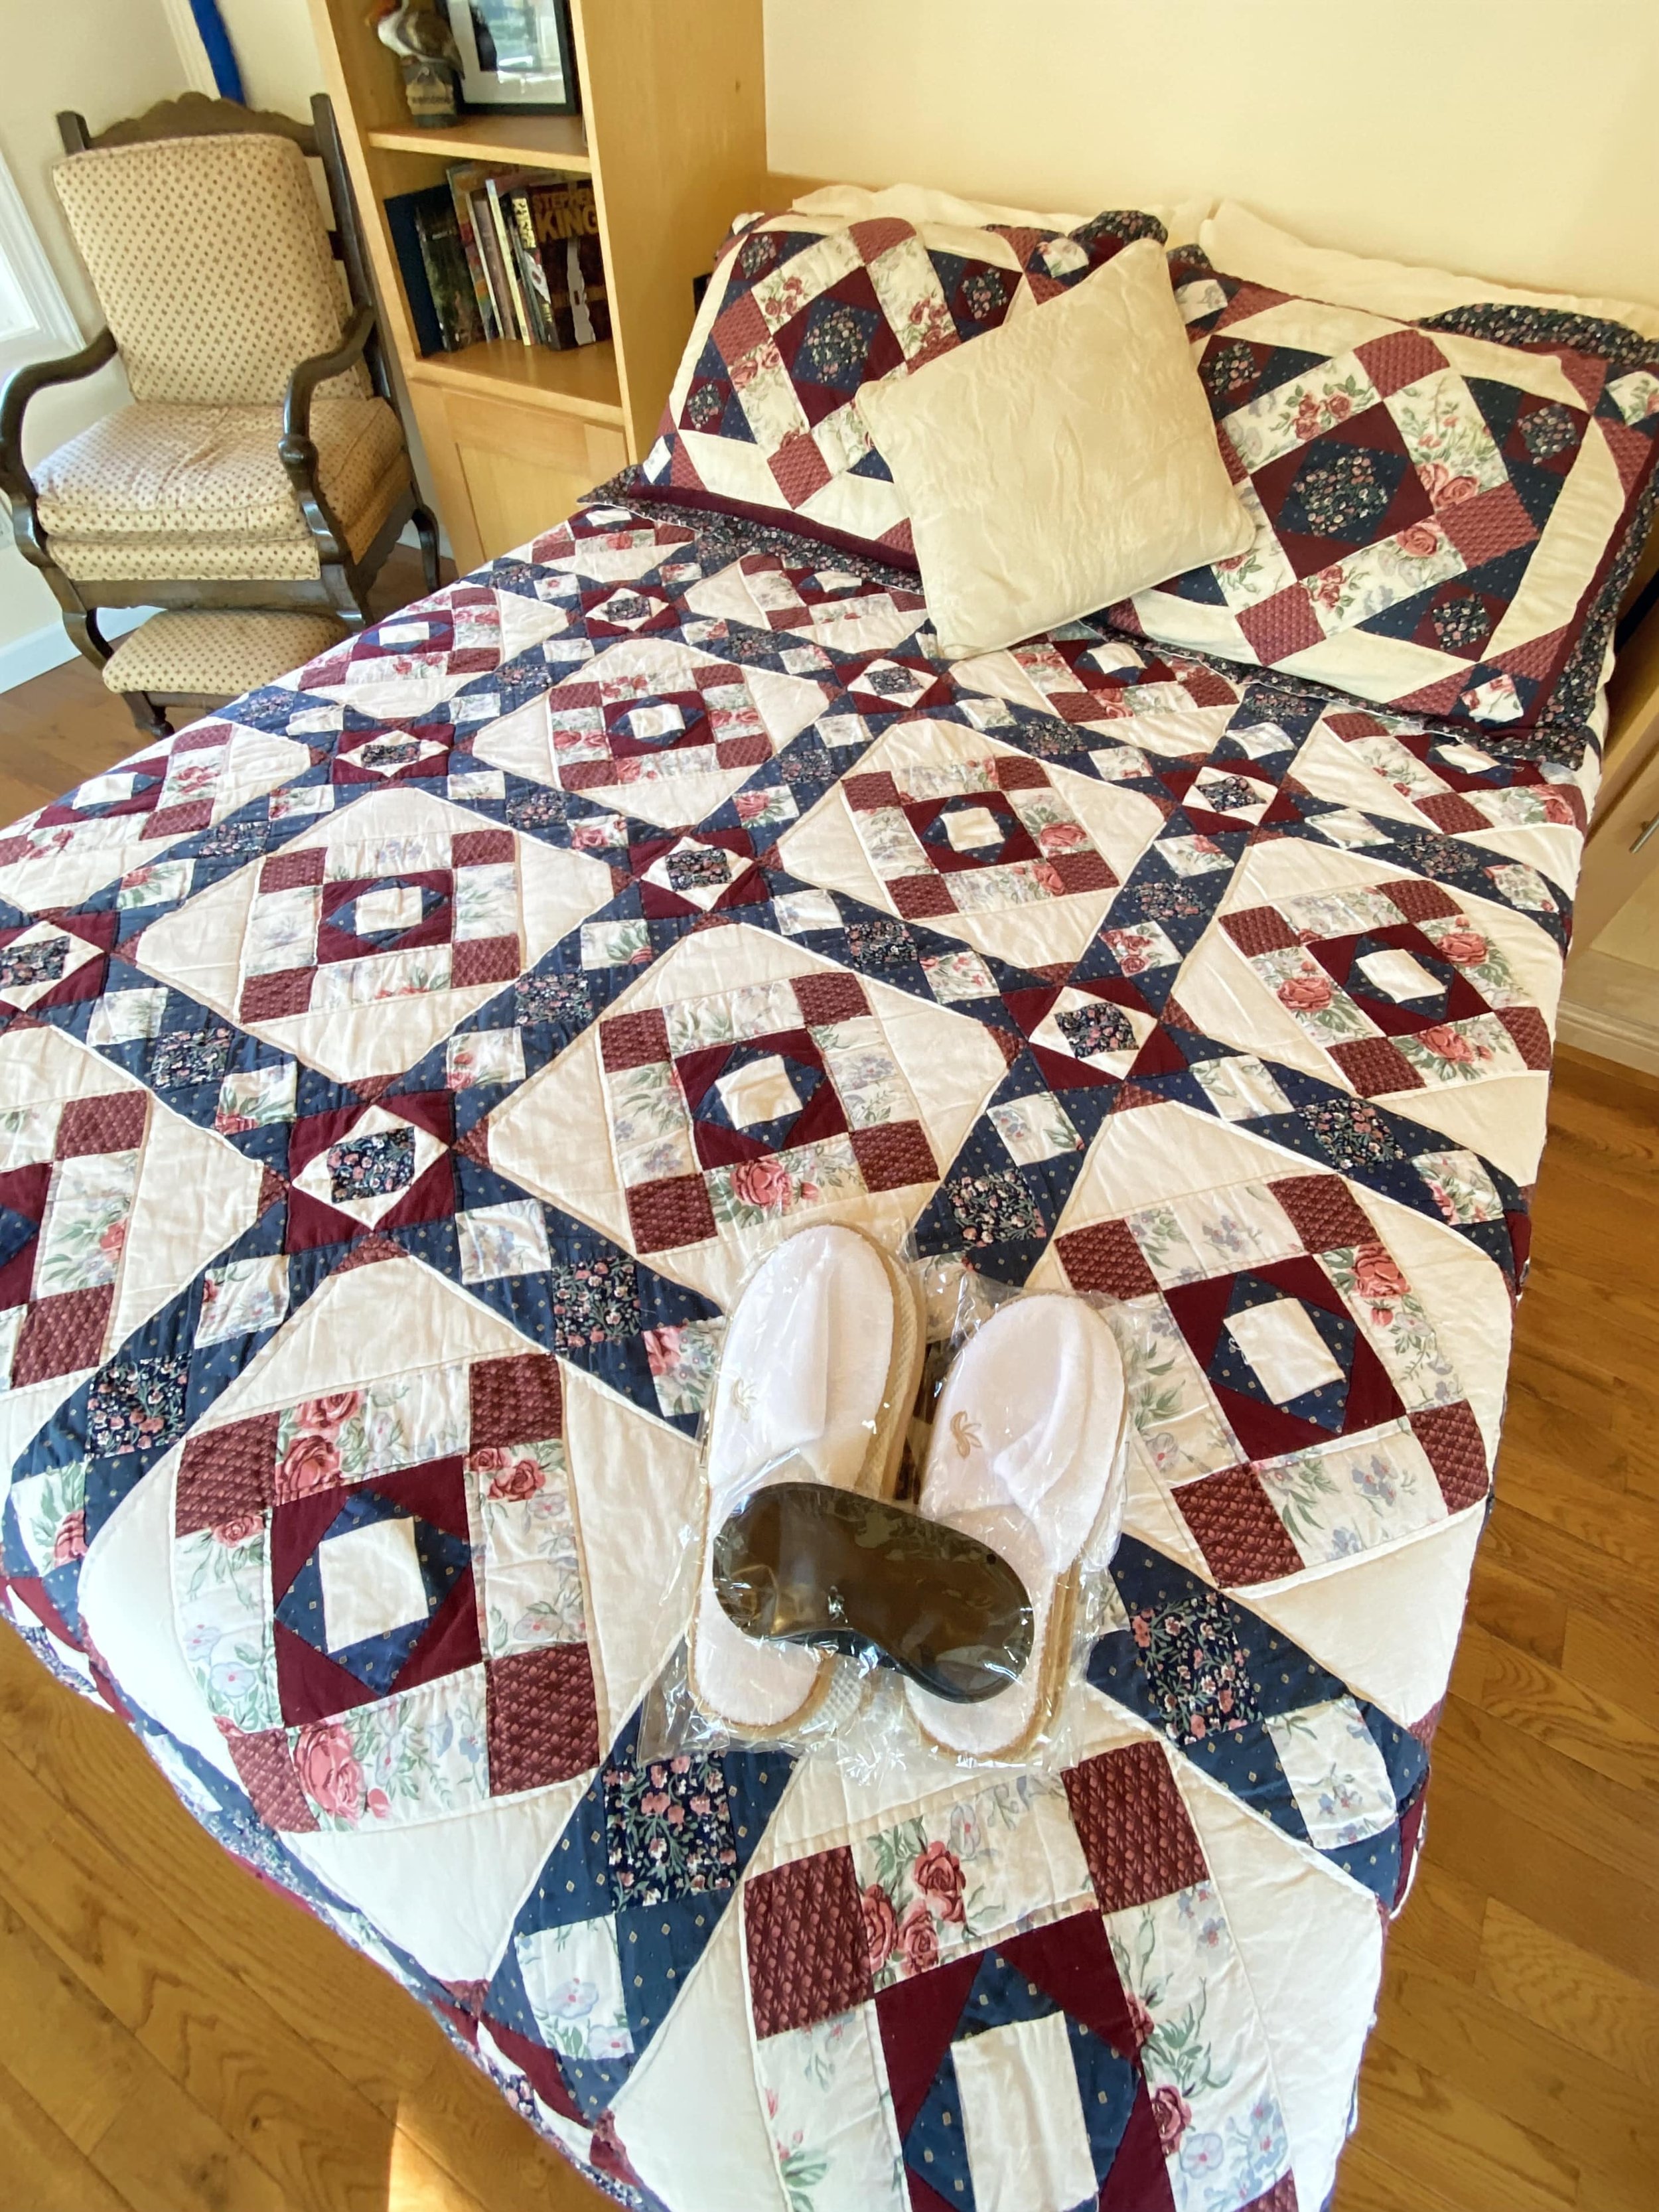 Slippers and Eye Mask on Bed_Mission Possible Airbnb_NarrowsburgNY.JPG